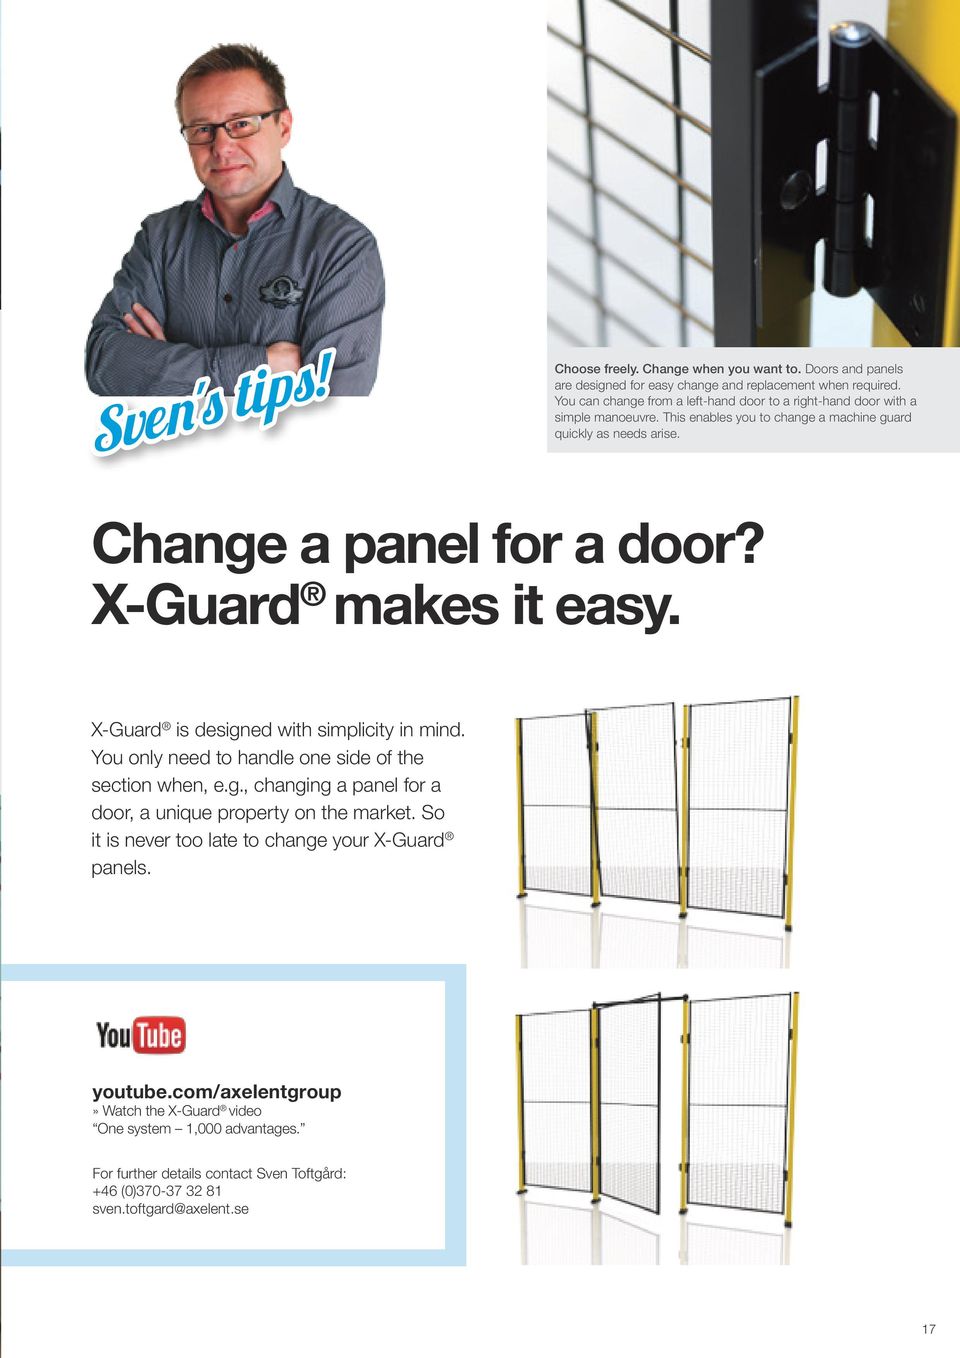 X-Guard makes it easy. X-Guard is designed with simplicity in mind. You only need to handle one side of the section when, e.g., changing a panel for a door, a unique property on the market.